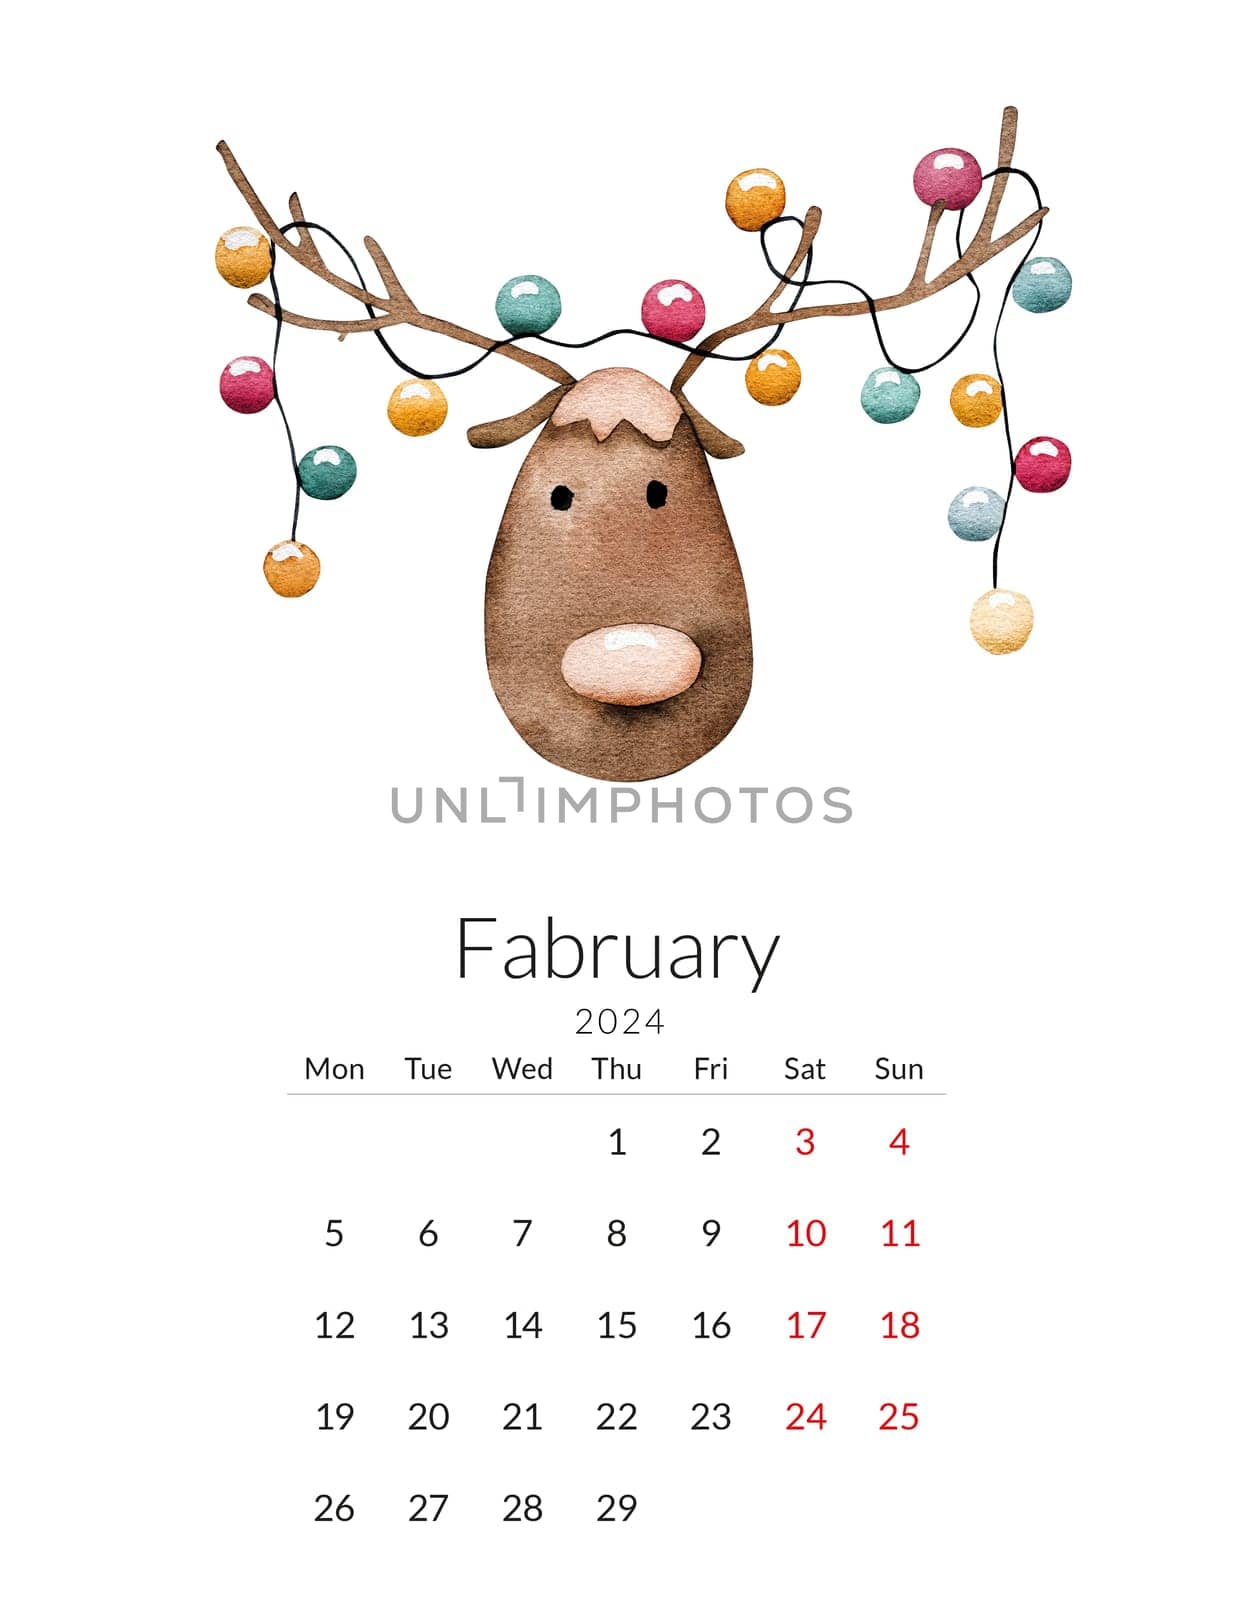 February 2024 calendar template. Handmade watercolor - New Year's deer with a garland on its horns